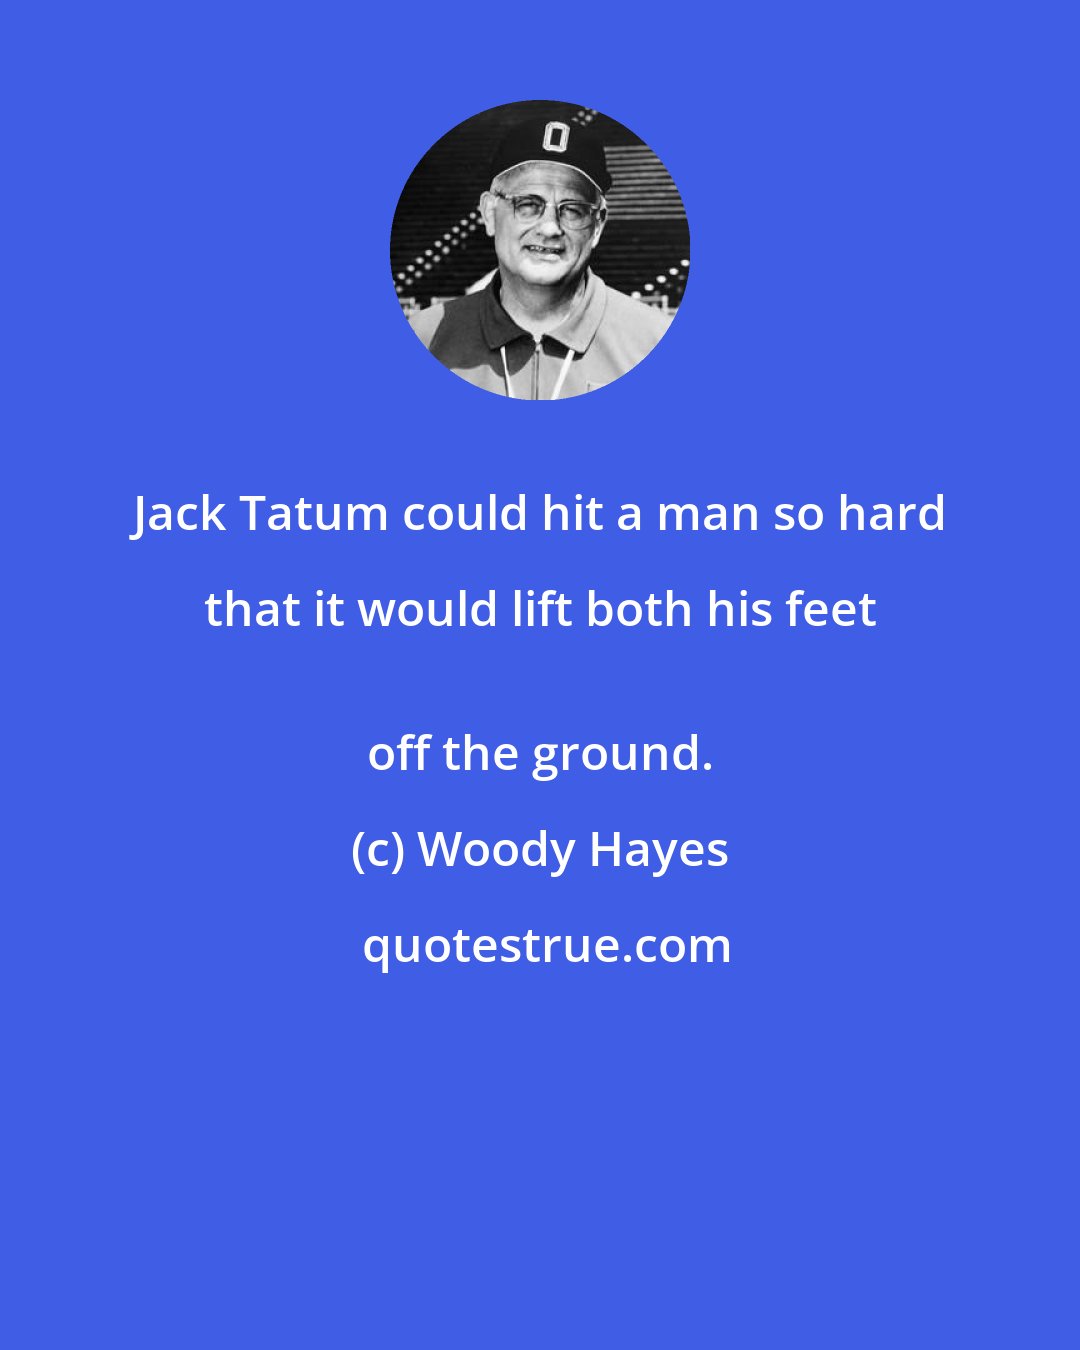 Woody Hayes: Jack Tatum could hit a man so hard that it would lift both his feet 
 off the ground.